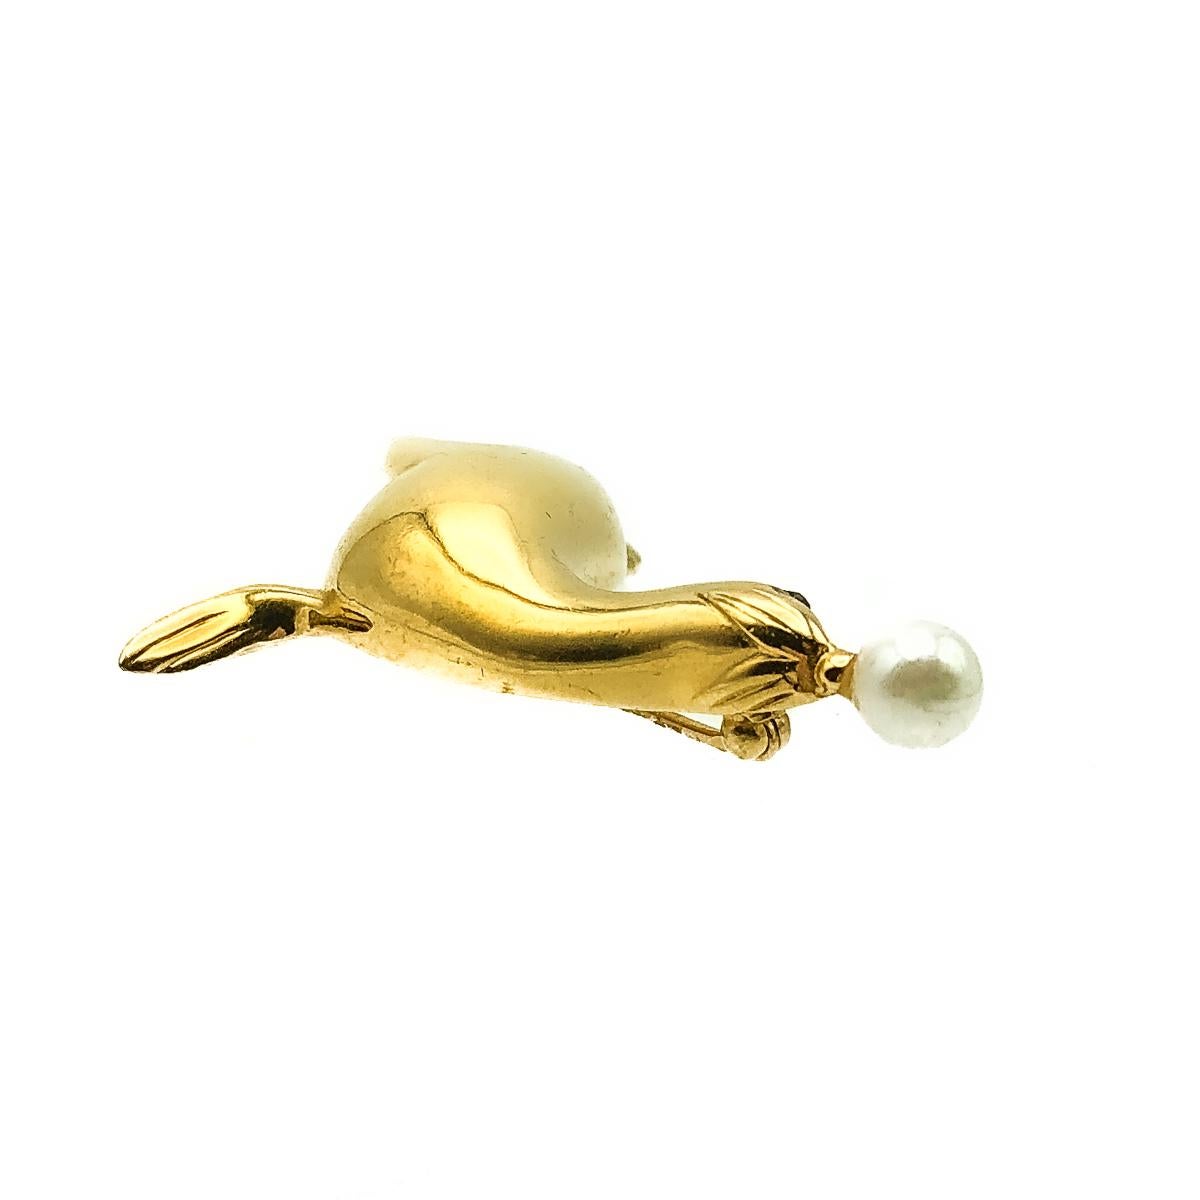 Vintage D'Orlan Sea Lion Brooch. Crafted in gold plated metal and faux simulated pearl. A super shiny sea lion balances a full pearl on his nose. In very good vintage condition, signed and approx. 5cm. A perfect whimsical pin for the animal lover. 